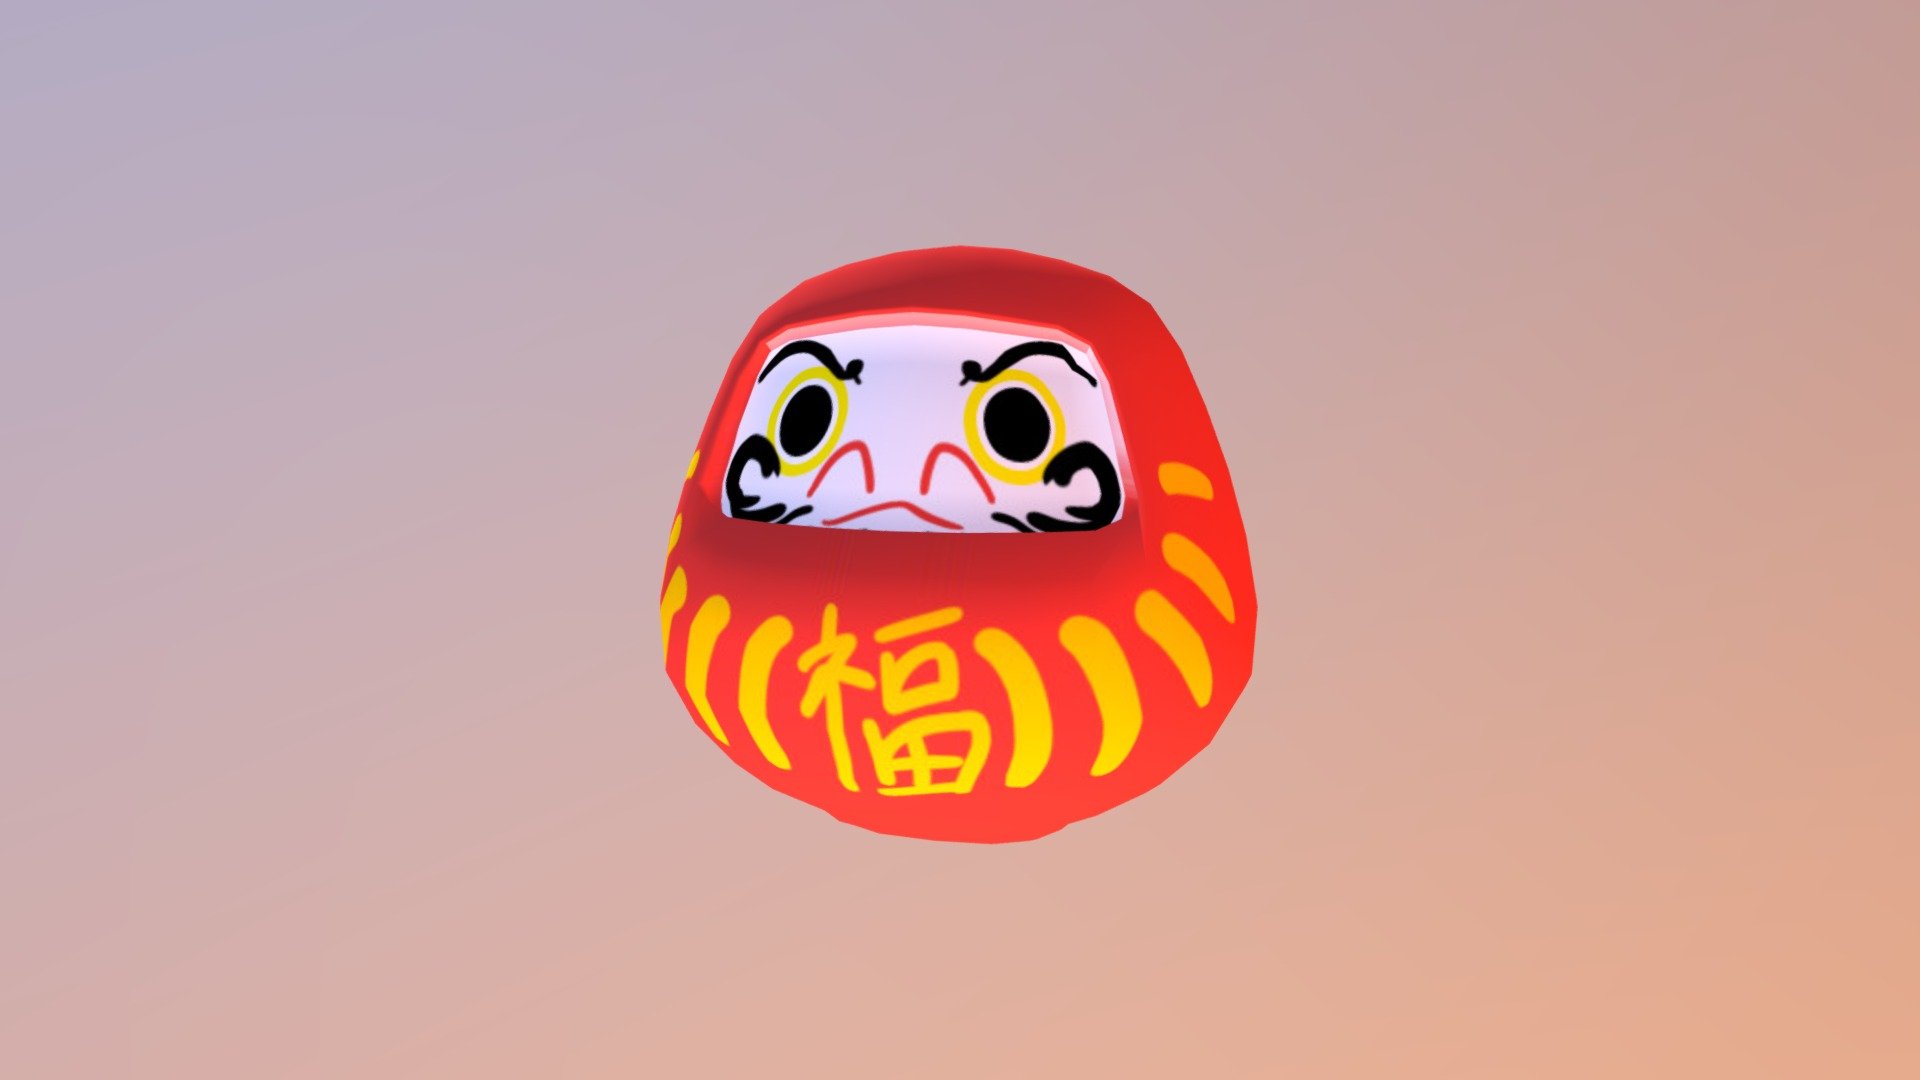 Low poly model of a daruma doll. Feel free to use for any kinds of projects if it suits your need. Texture design by me, don't forget to credit! - Daruma Doll - Download Free 3D model by May (@miyaharu) 3d model